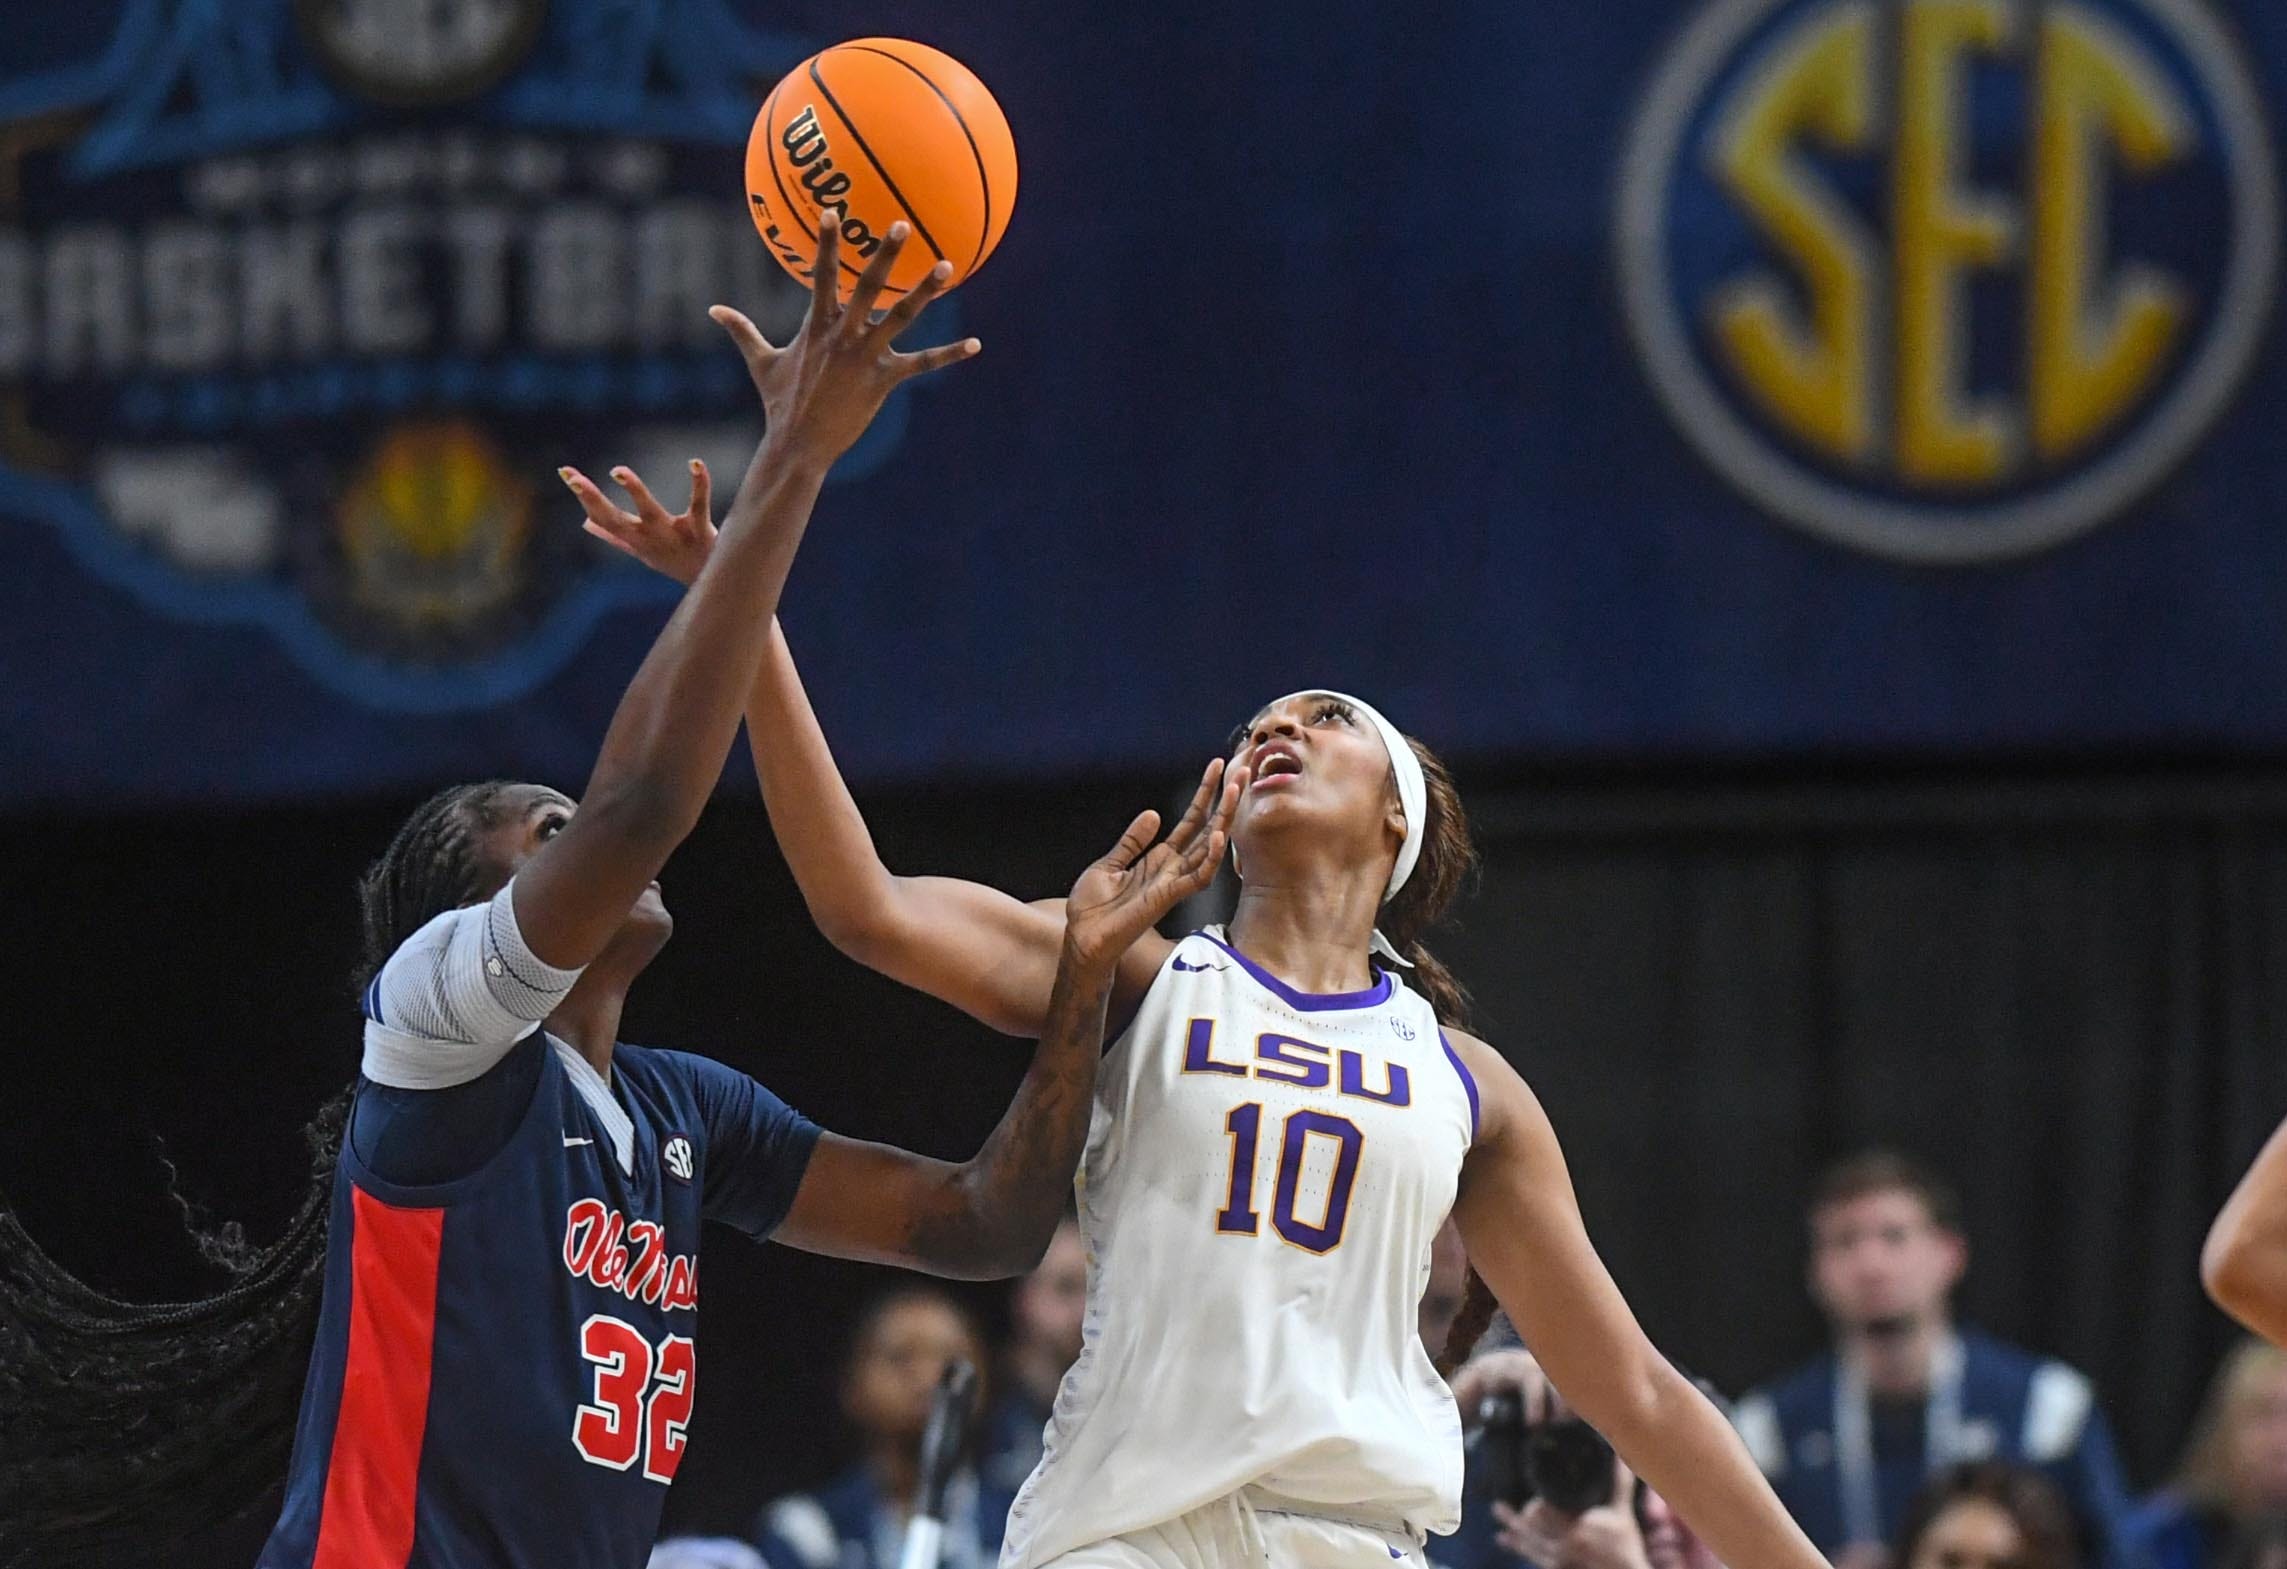 Ole Miss center Rita Igbokwe (32) and Louisiana State University forward Angel Reese (10) reach for a rebound during the fourth quarter of the SEC Women's Basketball Tournament game at the Bon Secours Wellness Arena in Greenville, S.C. Saturday, March 9, 2024.